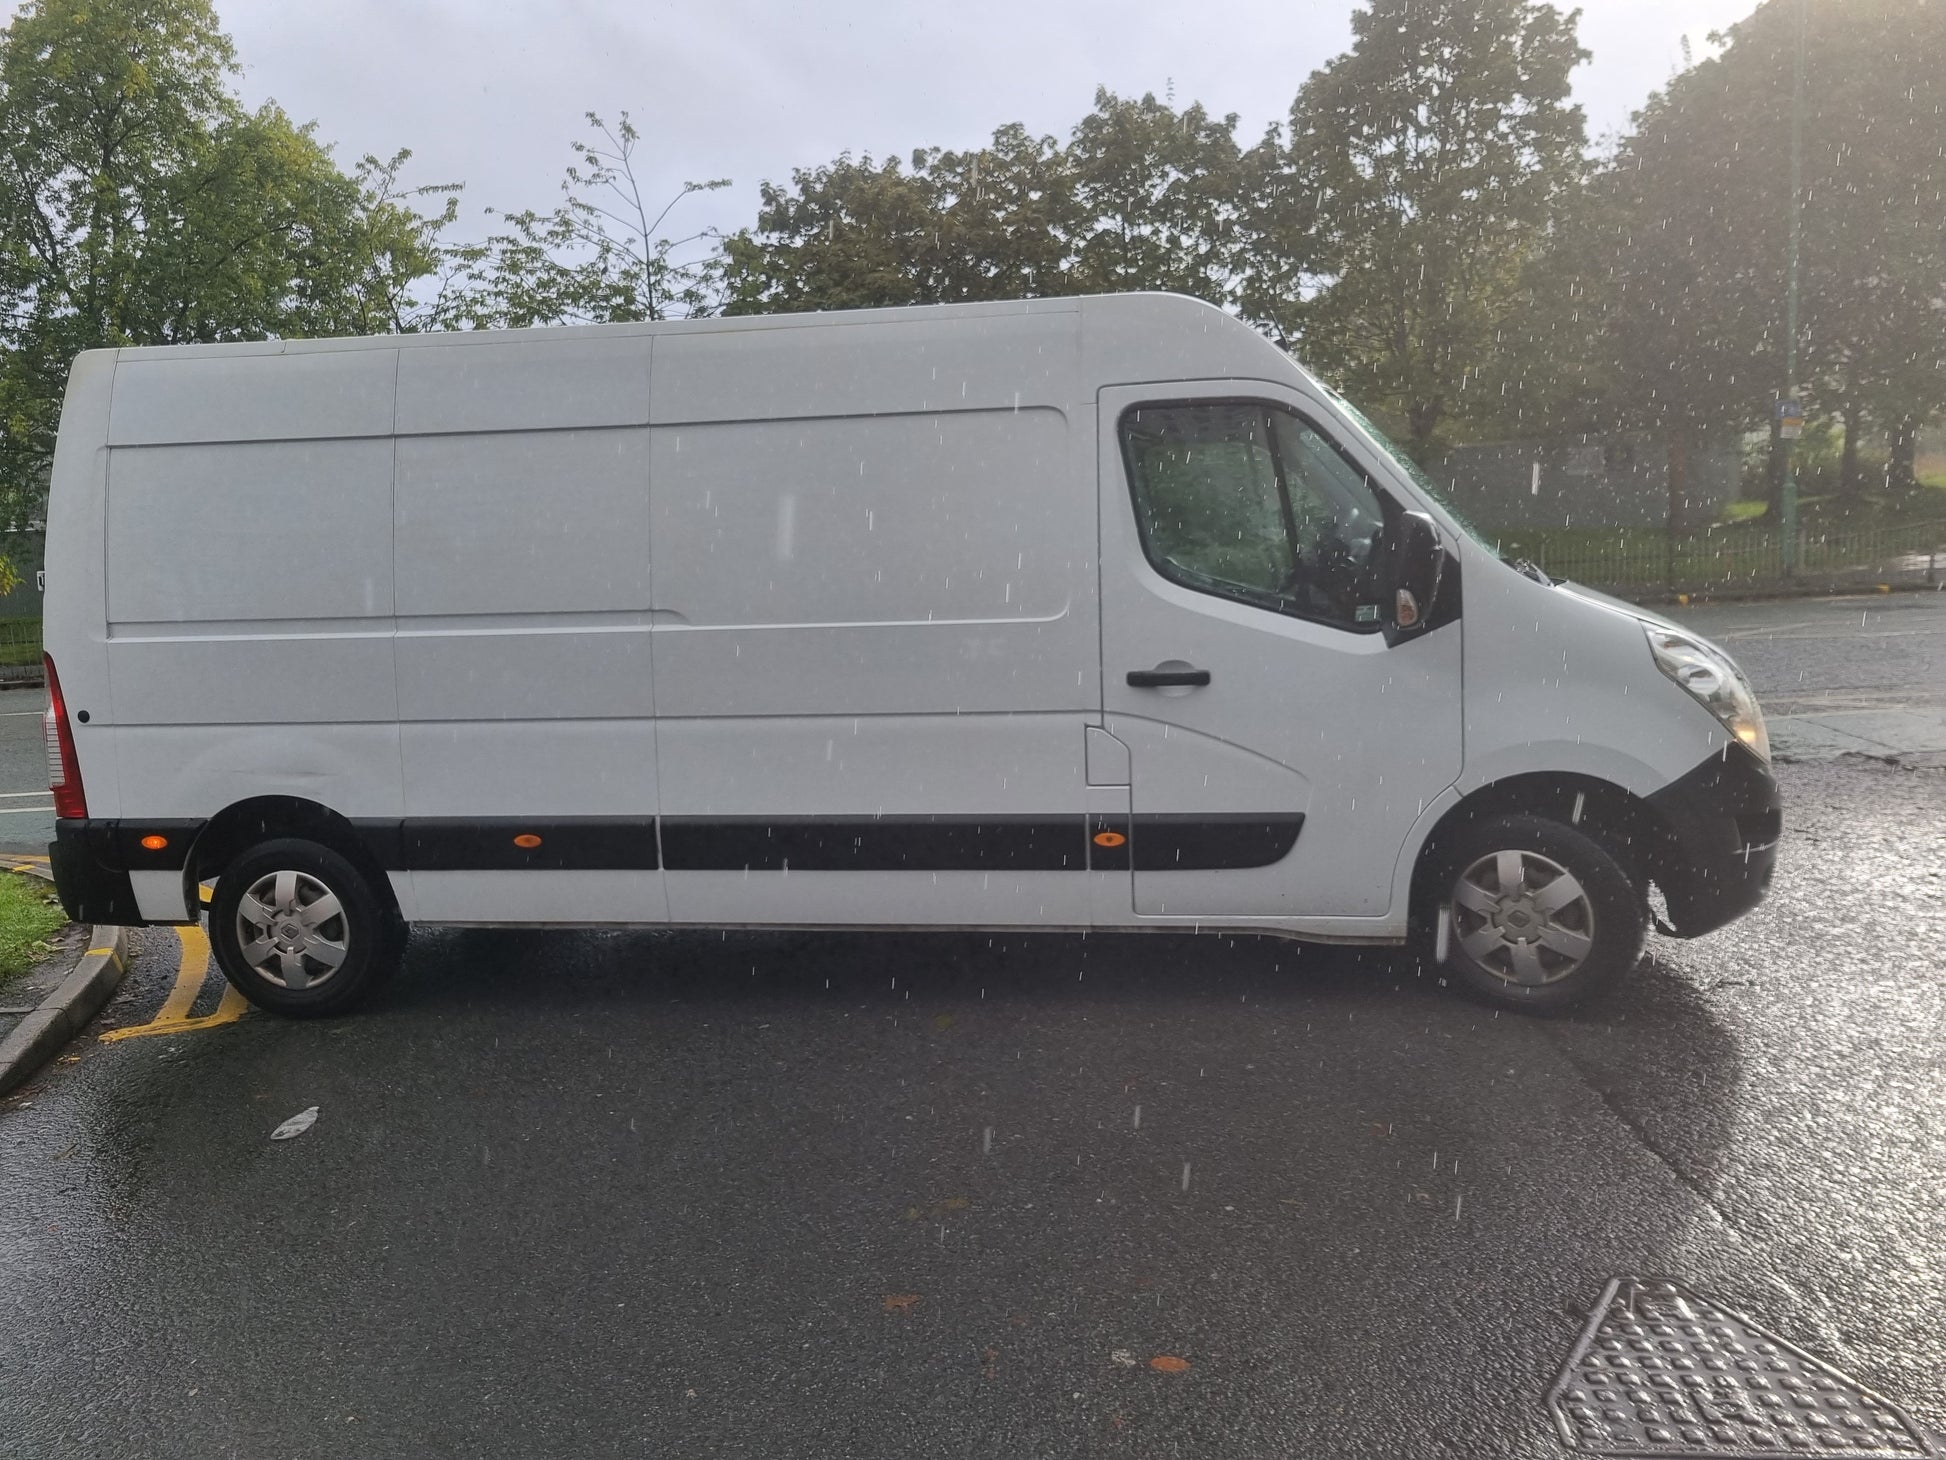 Bid on RENAULT MASTER LWB 2016 BUSINESS 125 BHP- Buy &amp; Sell on Auction with EAMA Group